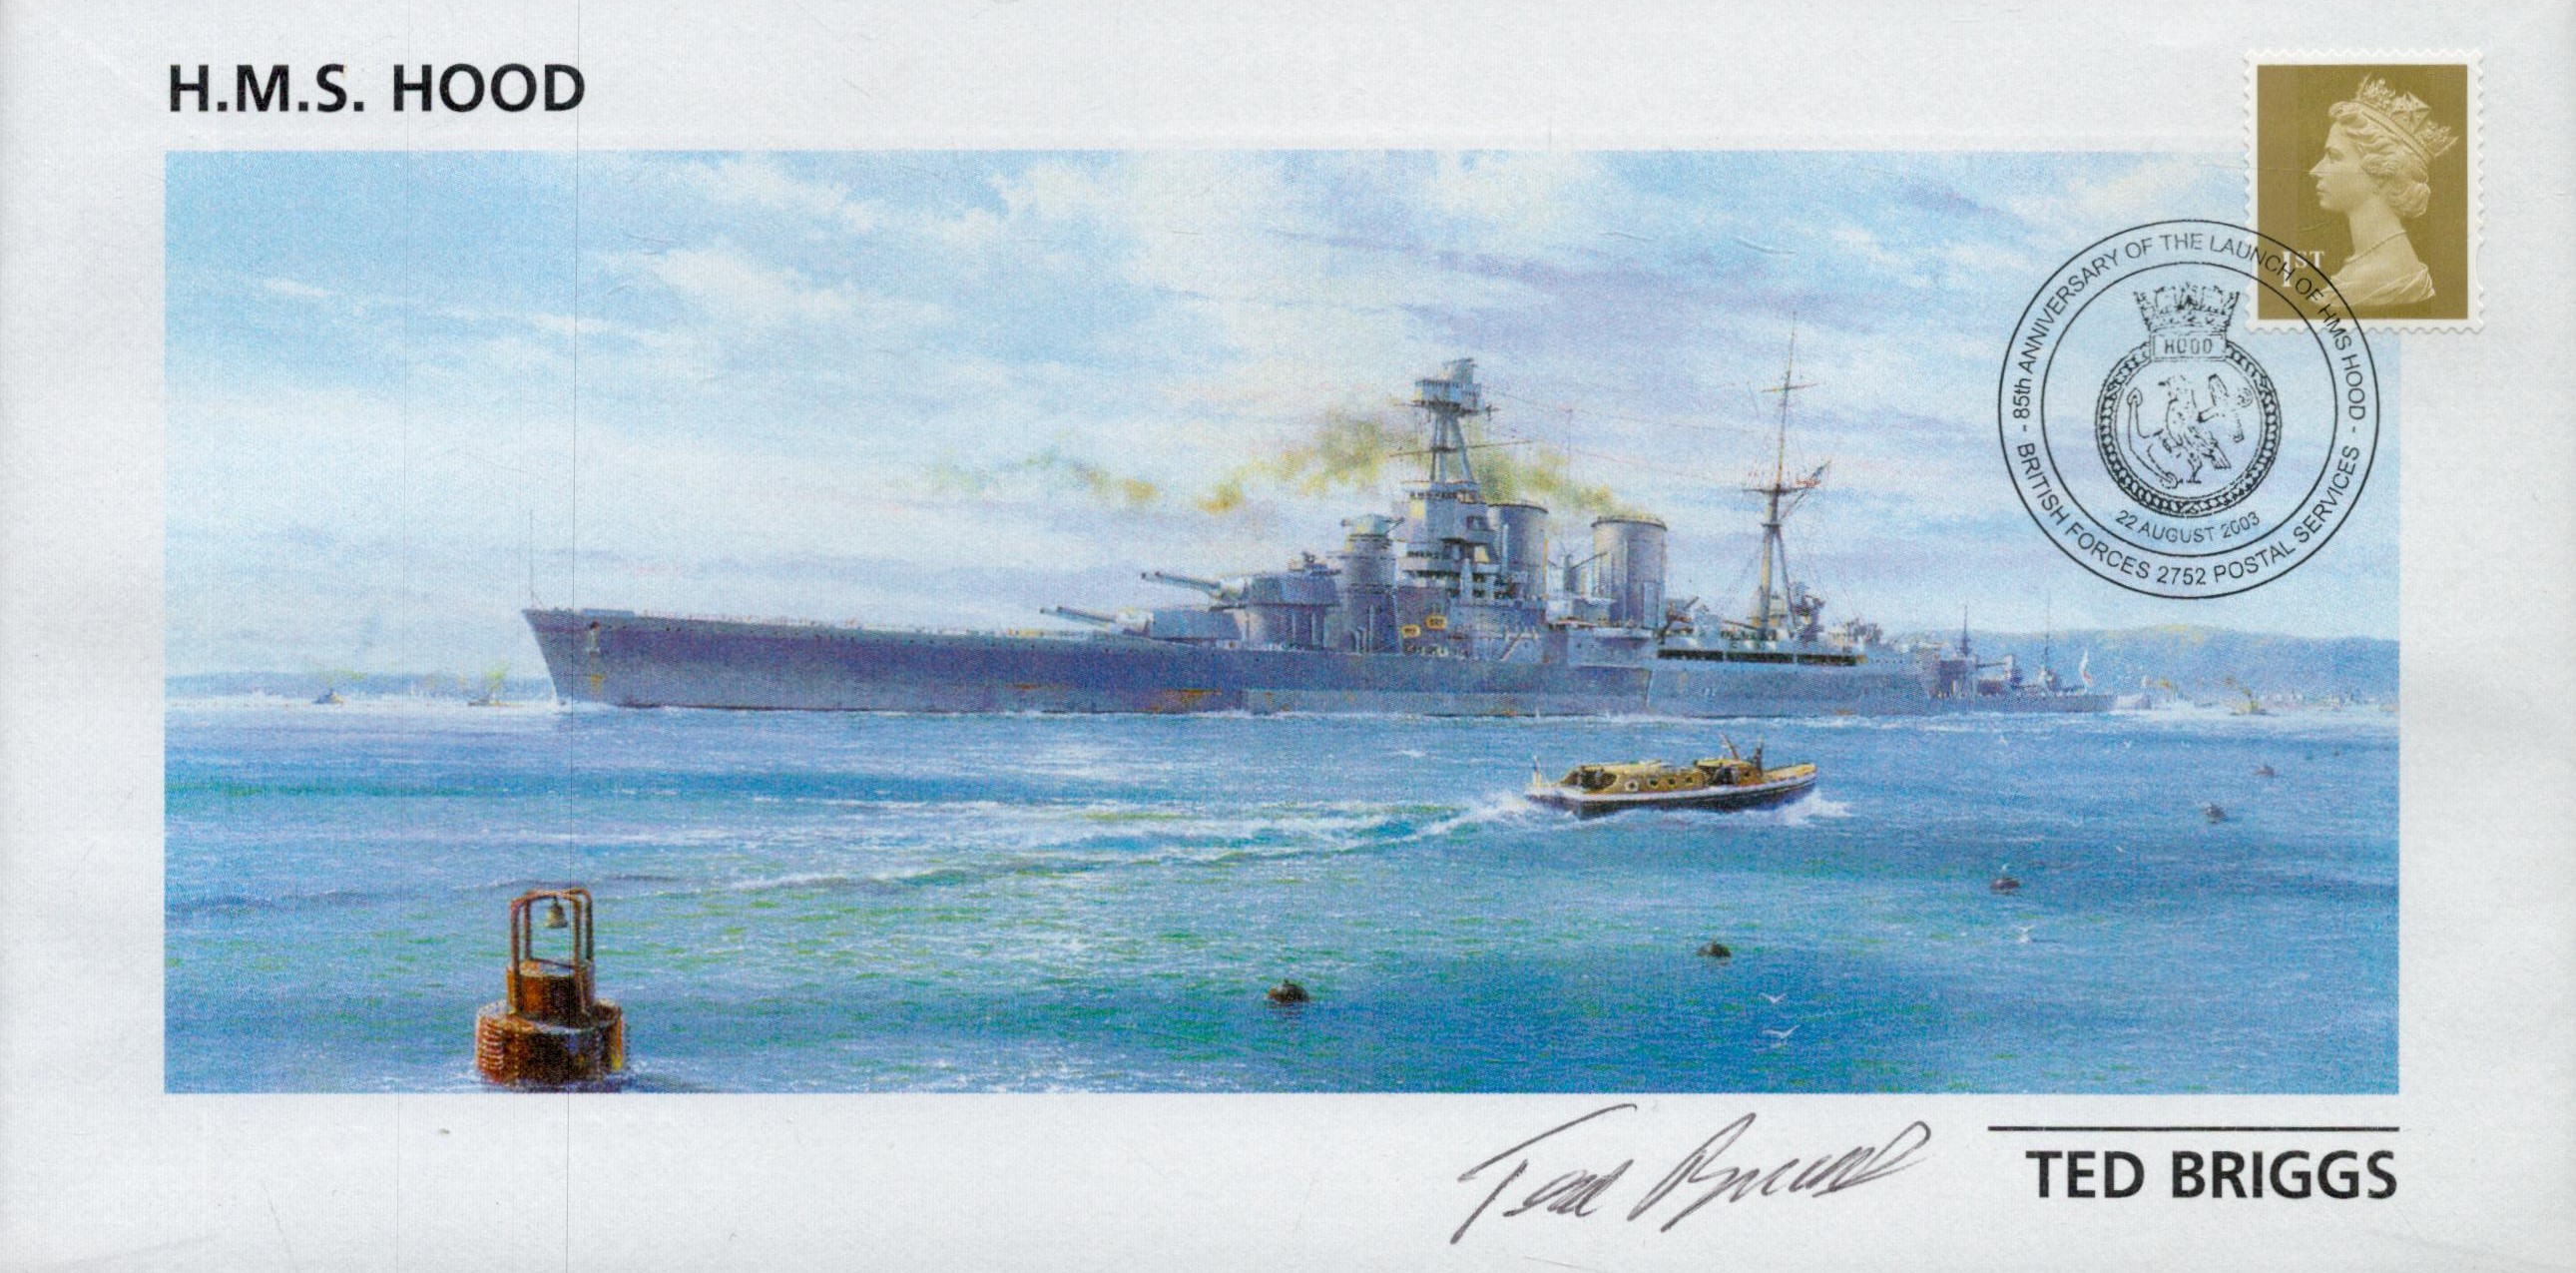 WW2 HMS Hood survivor Ted Briggs signed 85th ann of the Launch. Briggs was one of only 3 survivors